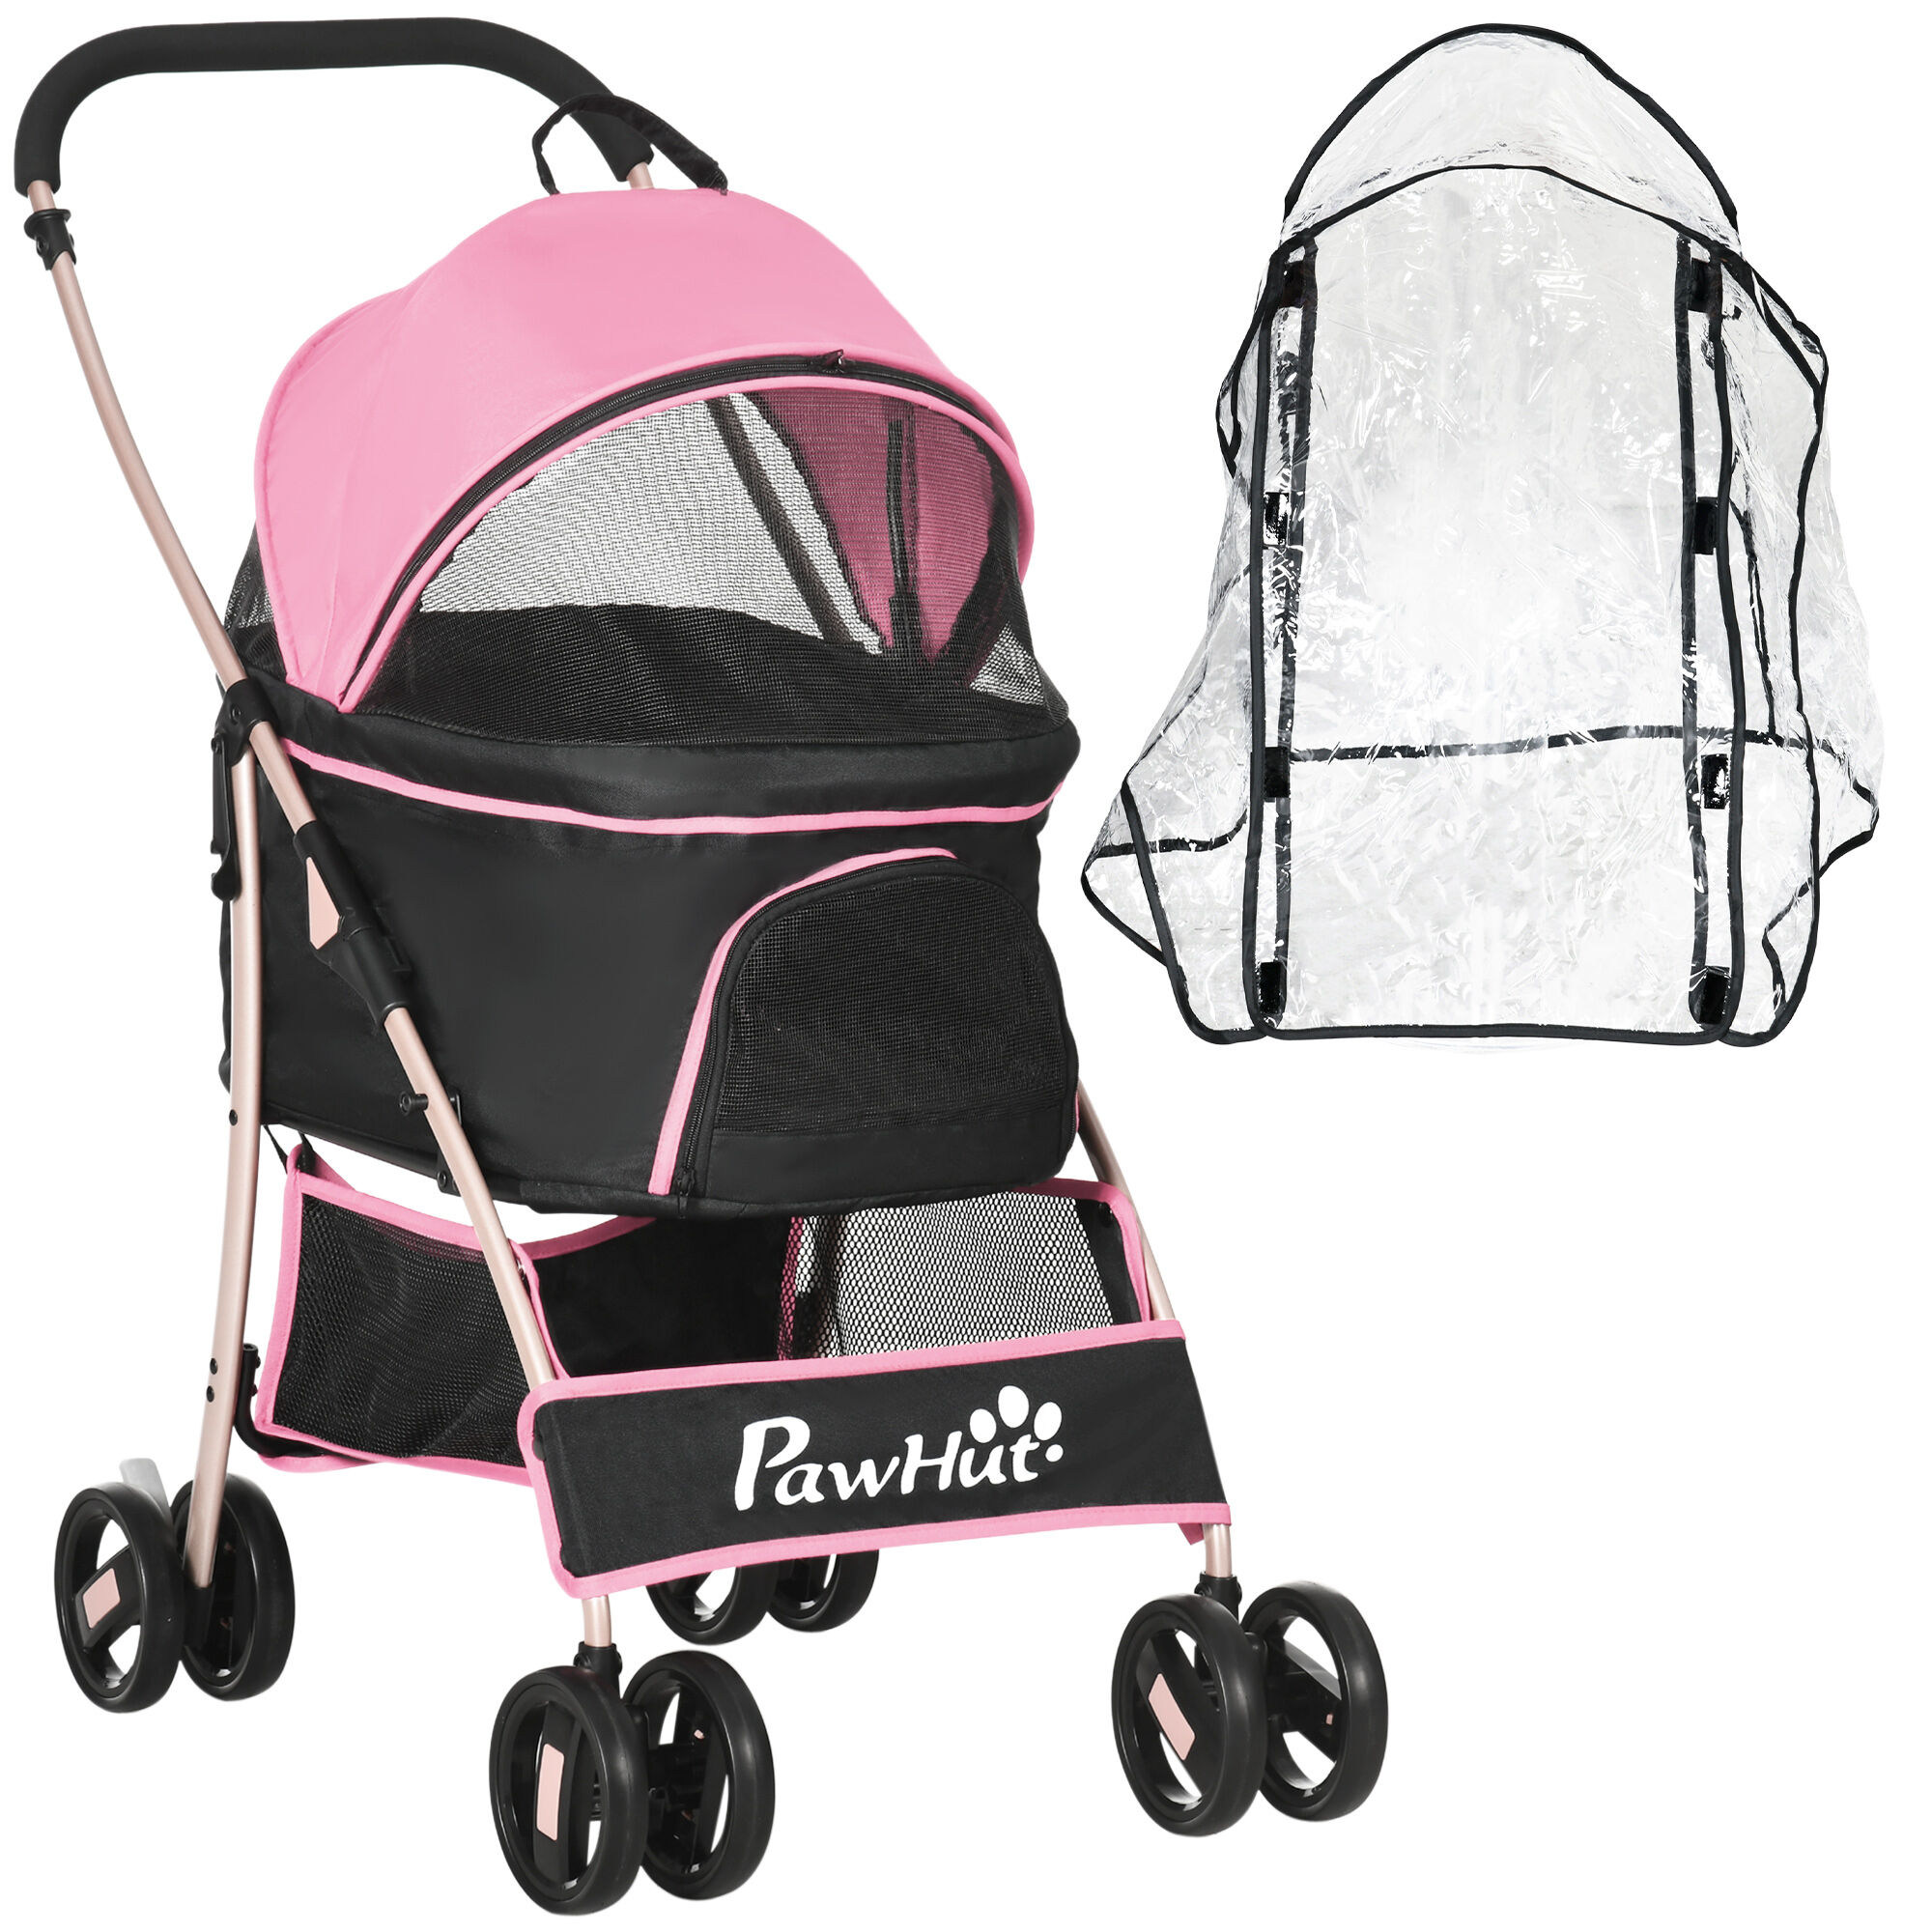 PawHut Multifunctional Pet Stroller, 3-in-1 Dog and Cat Pushchair with Rain Cover, Foldable Carrier, Universal Wheels, Pink